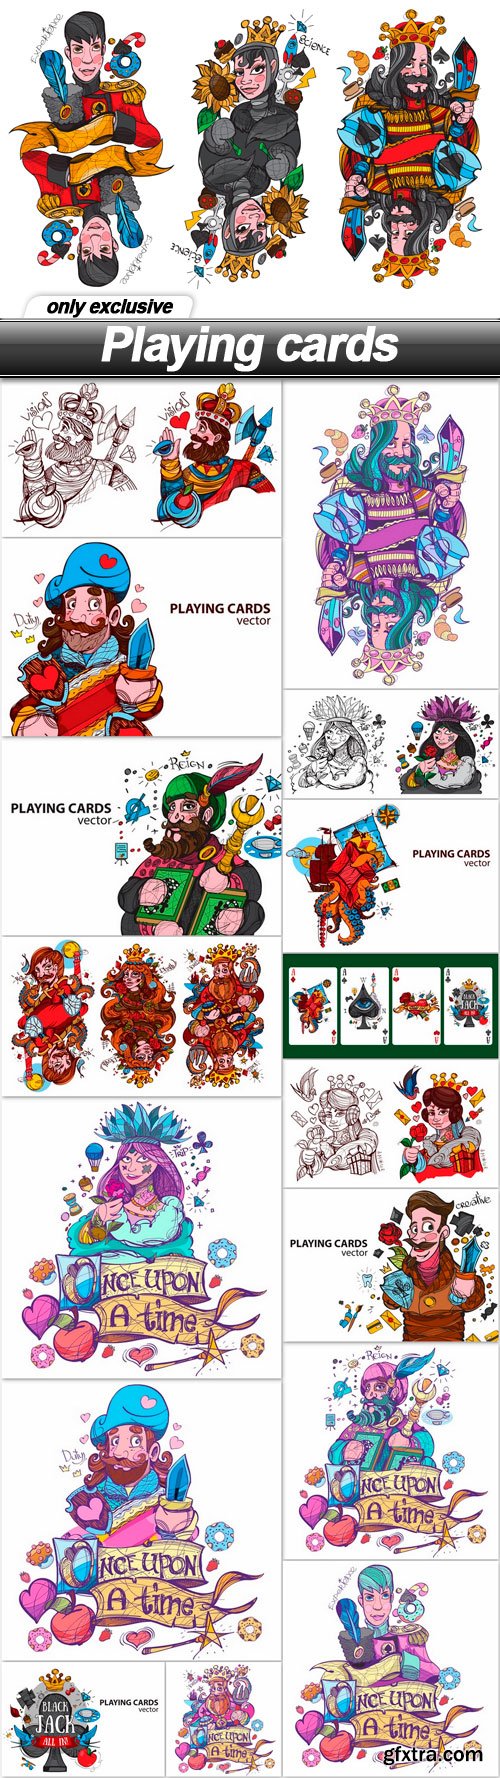 Playing cards - 17 EPS